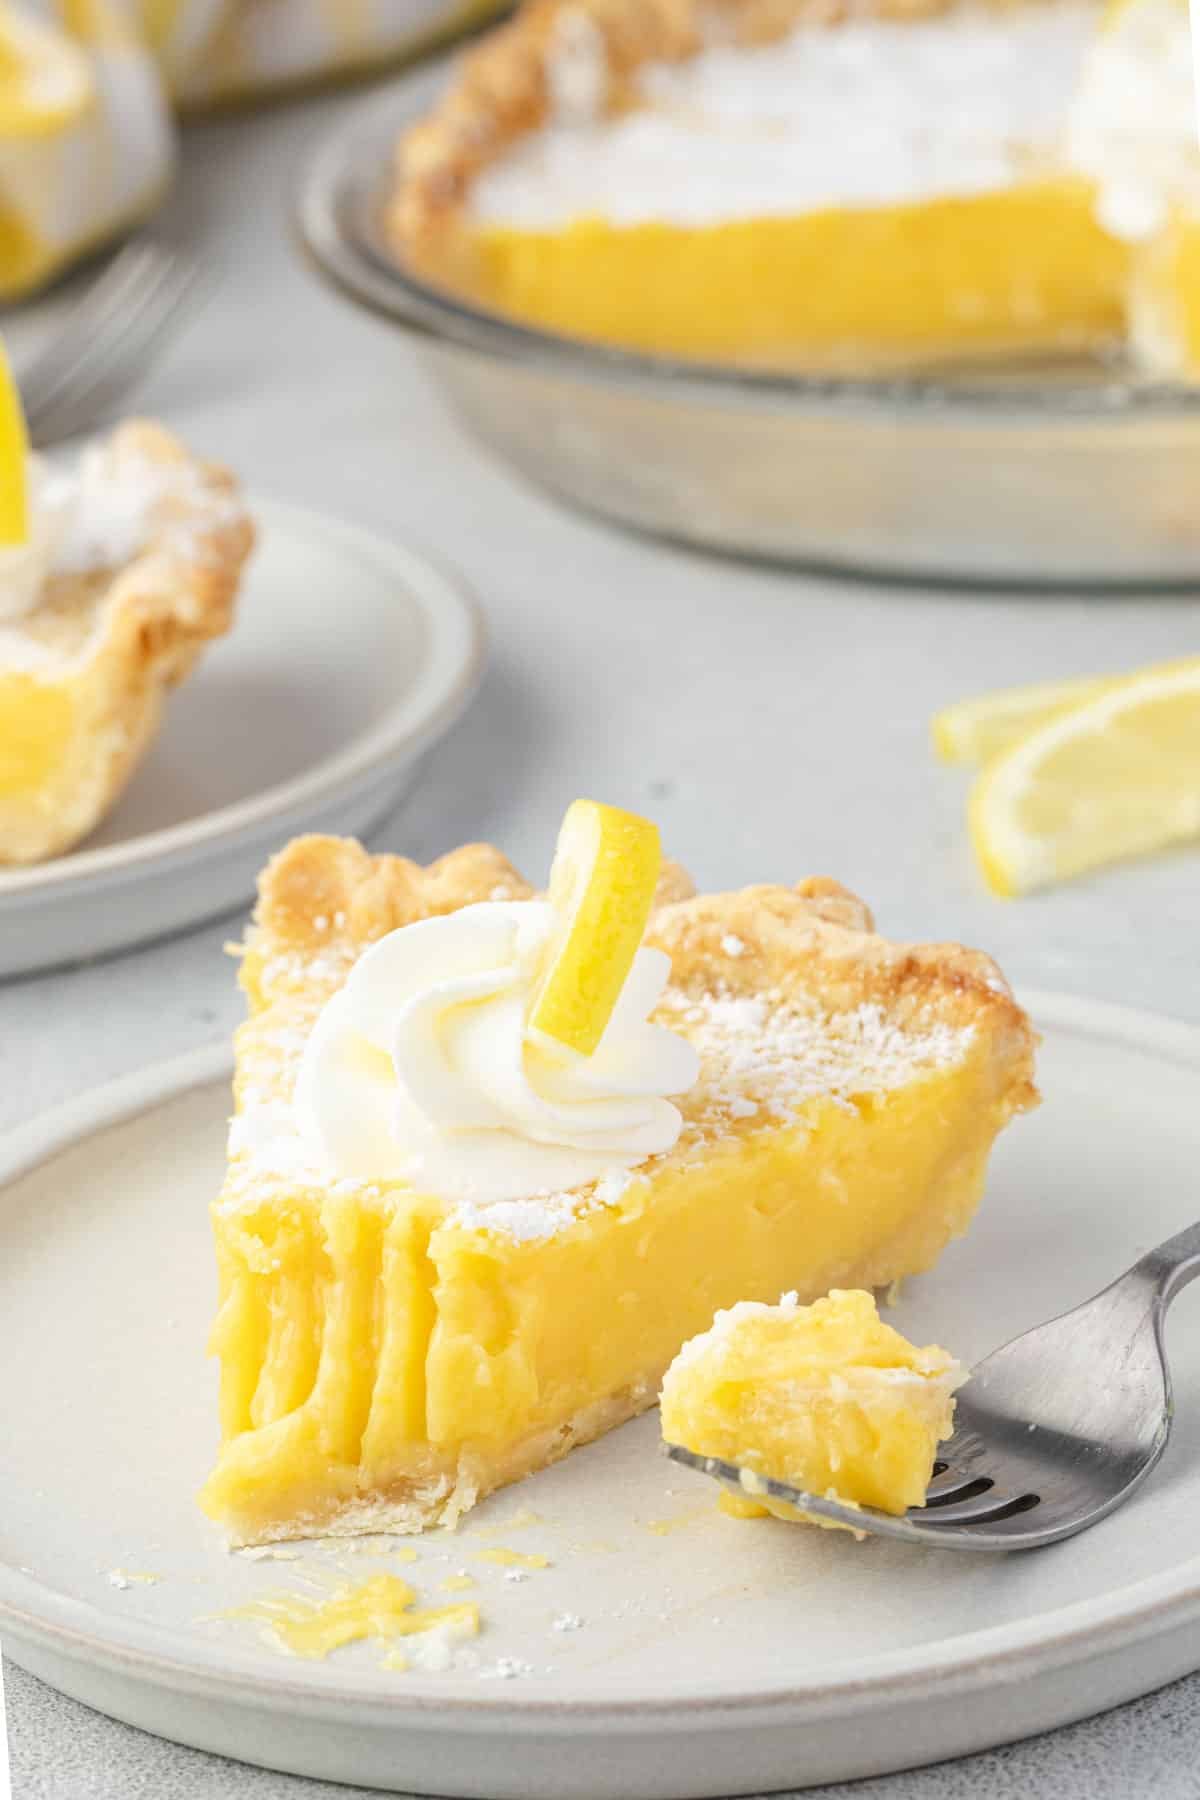 Slice of lemon pie on a plate with a bite on a fork, and the cut whole pie in the background.